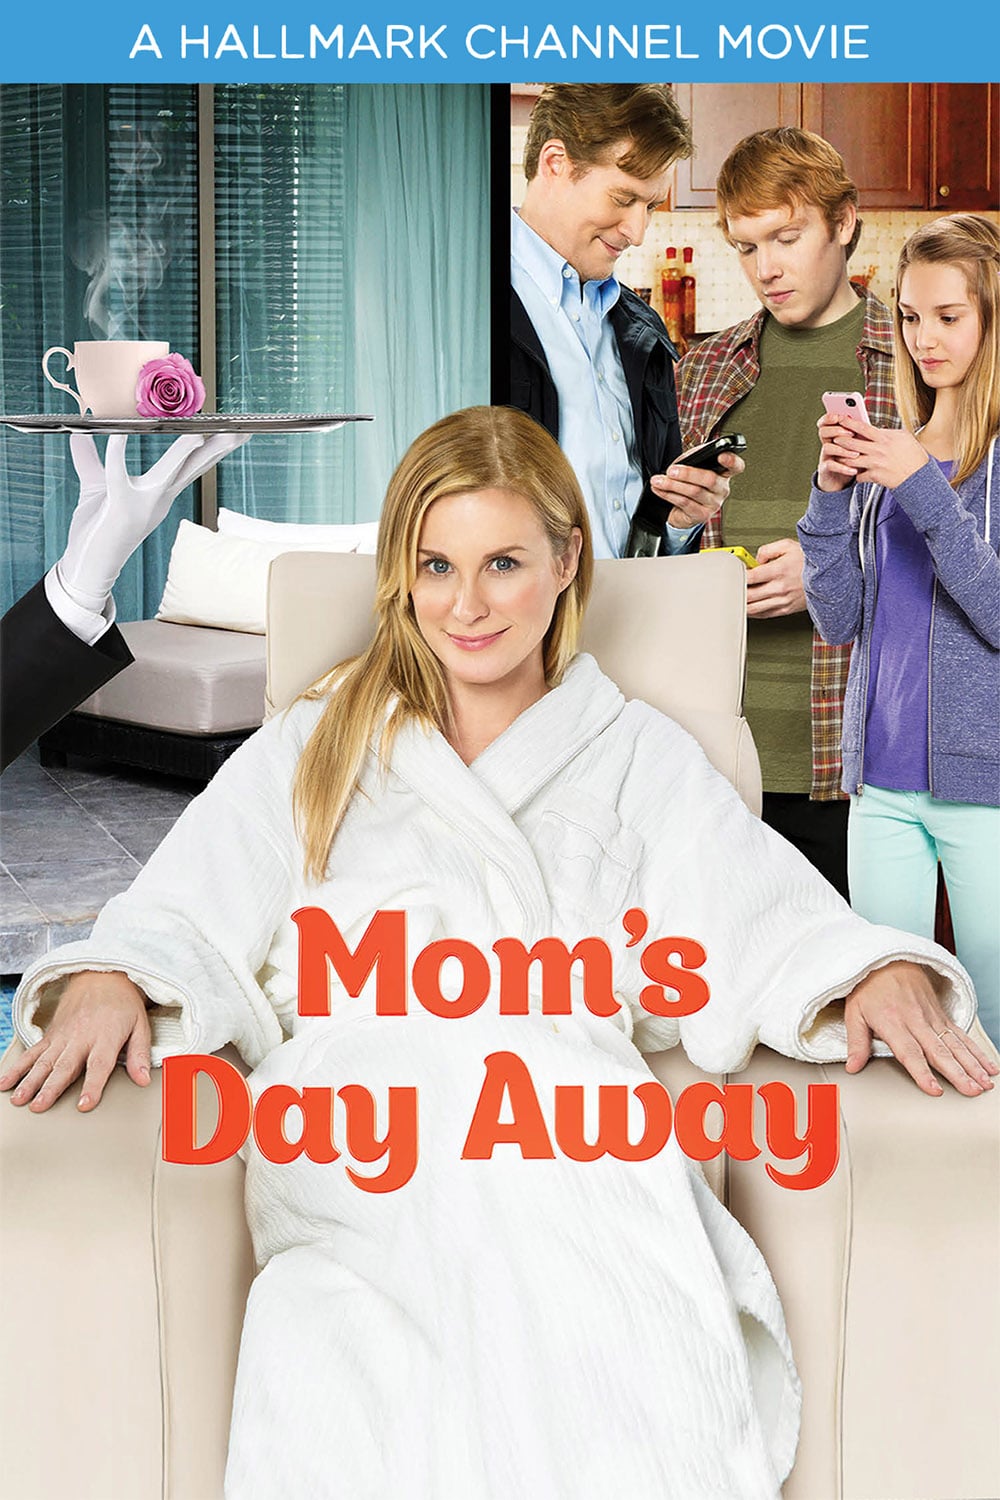 Poster for the movie "Mom's Day Away"